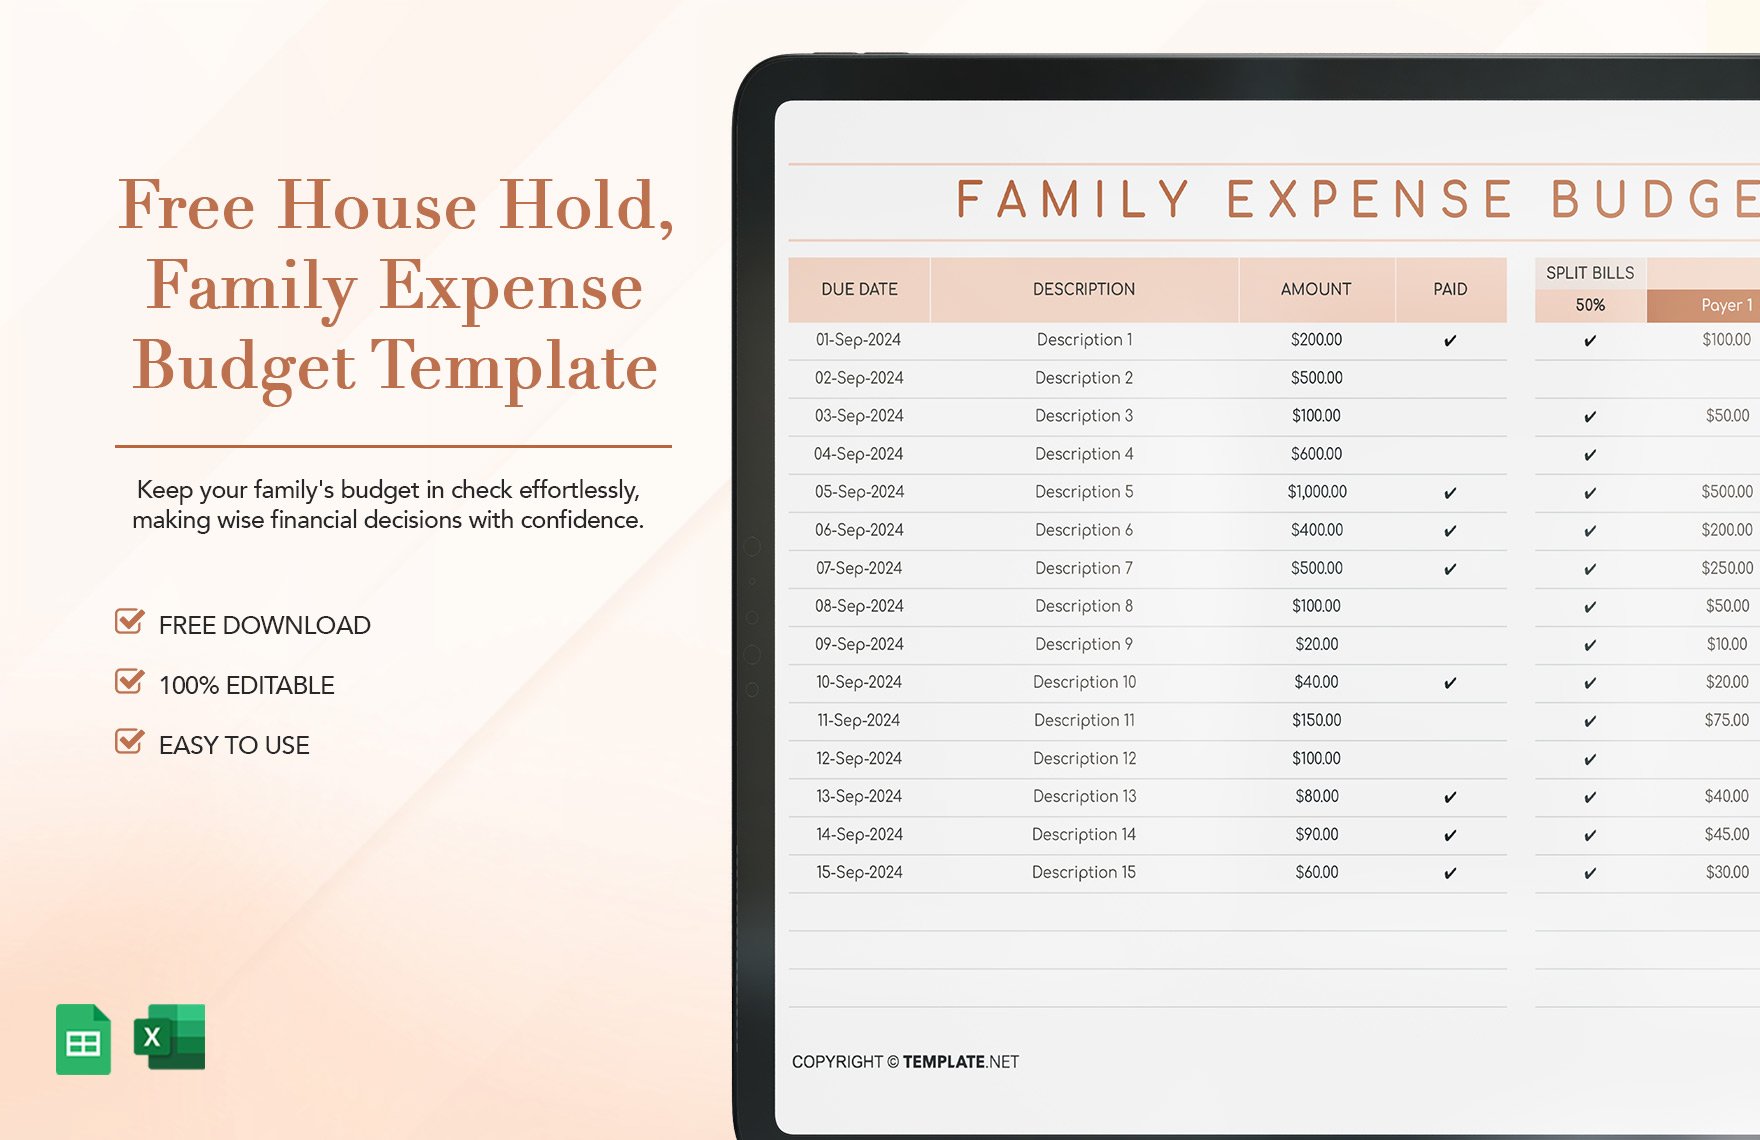 Free House Hold, Family Expense Budget Template